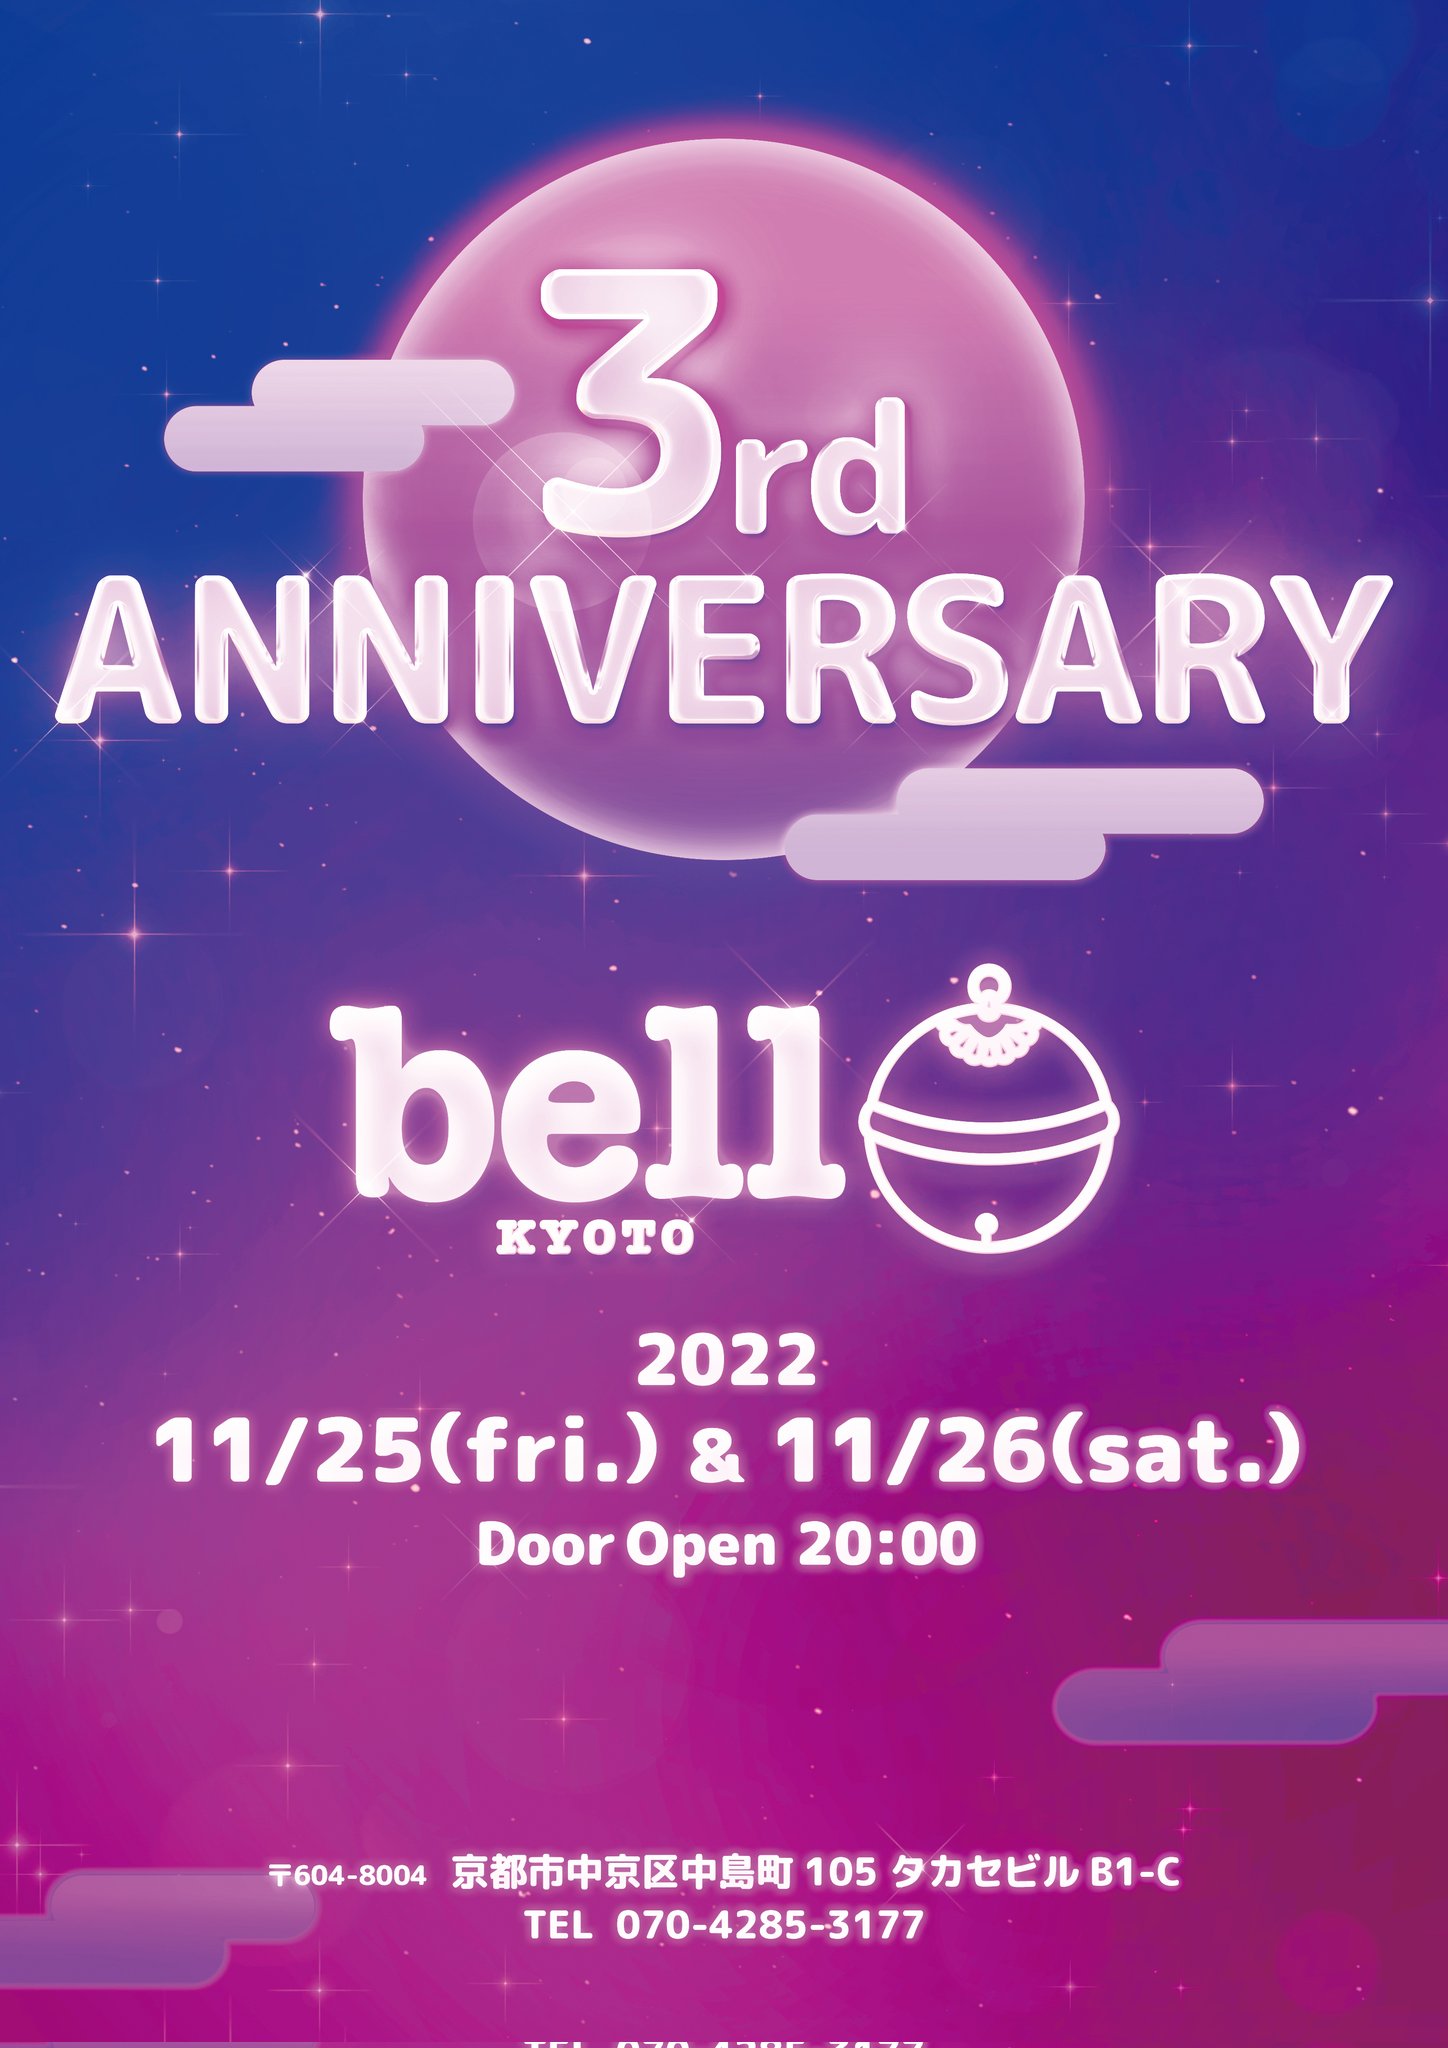 3rd.anniversary party